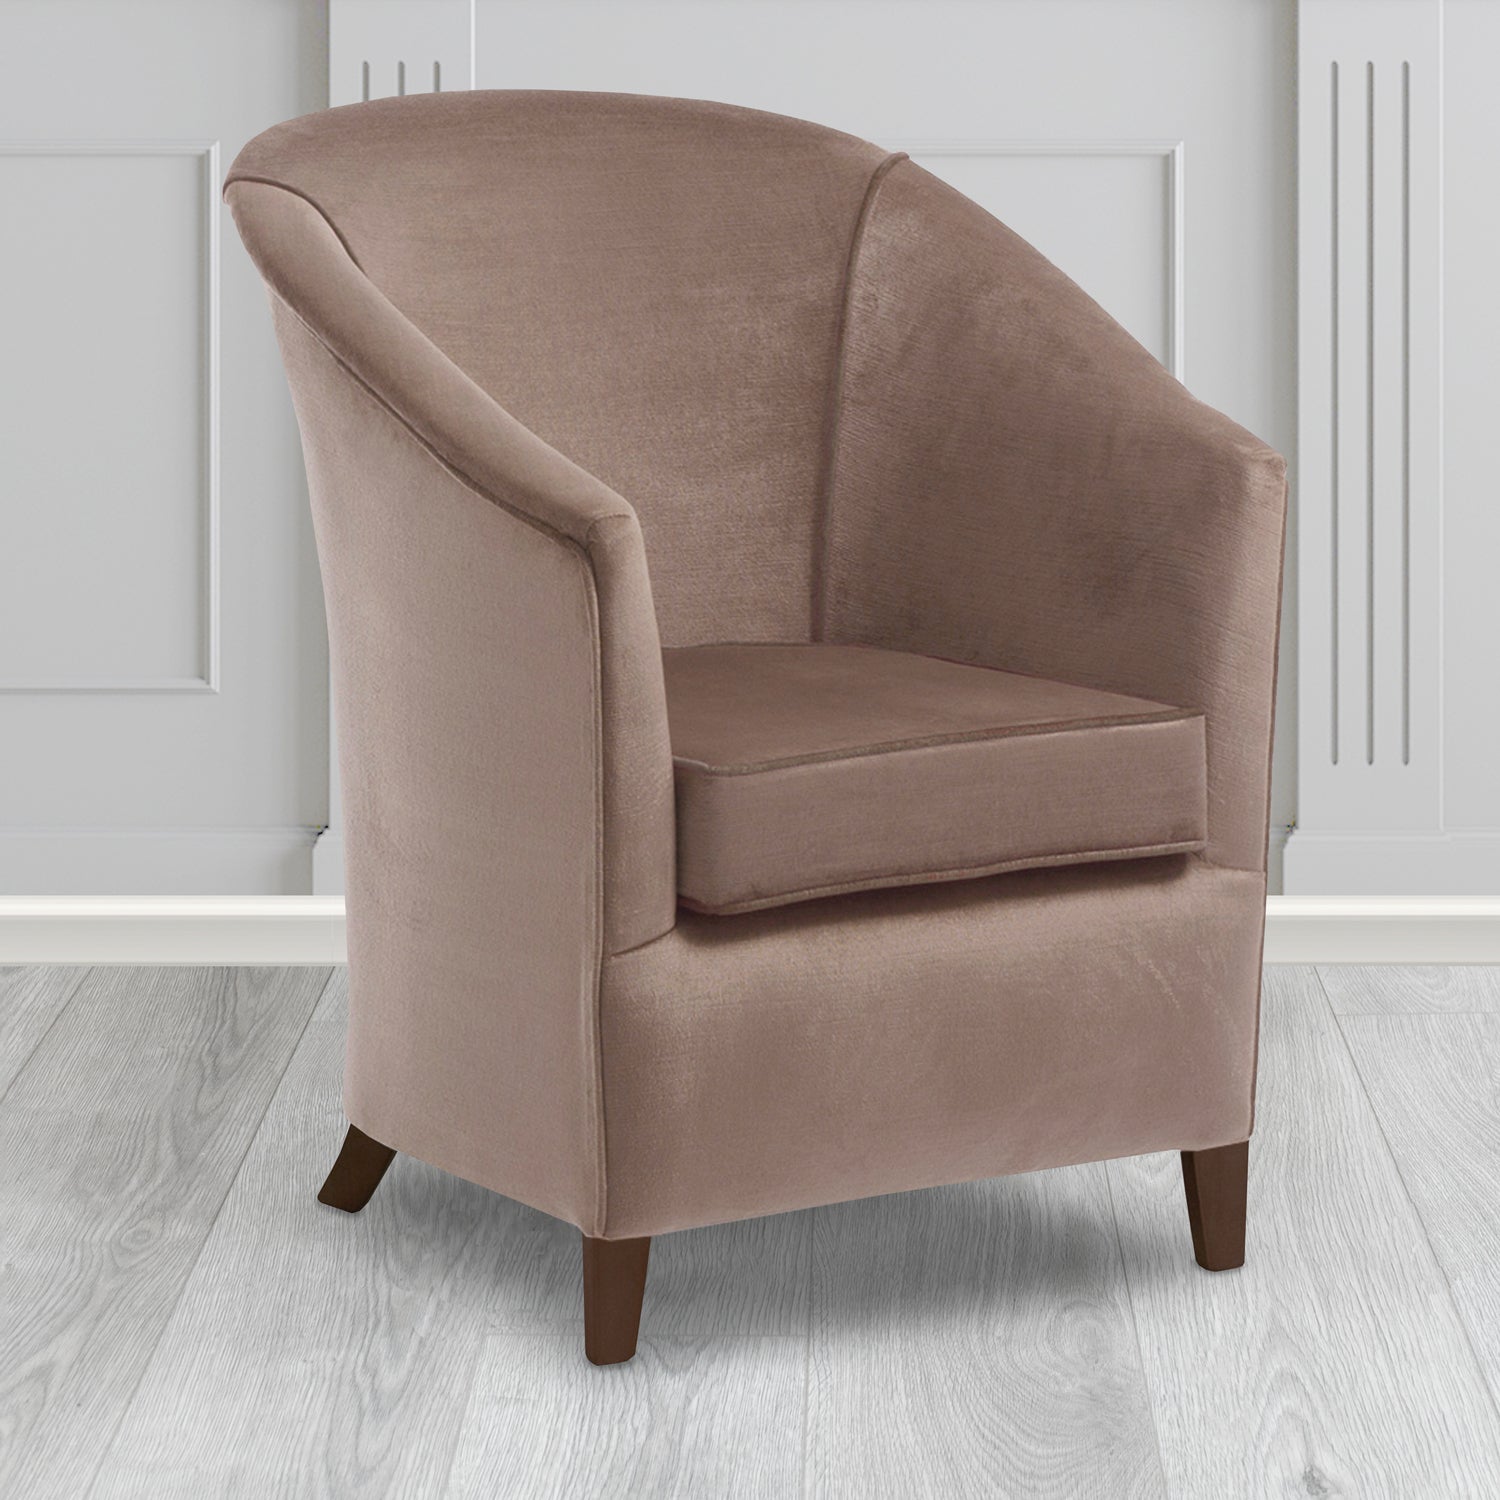 Bolton Tub Chair in Noble 708 Truffle Crib 5 Velvet Fabric - Water Resistant - The Tub Chair Shop